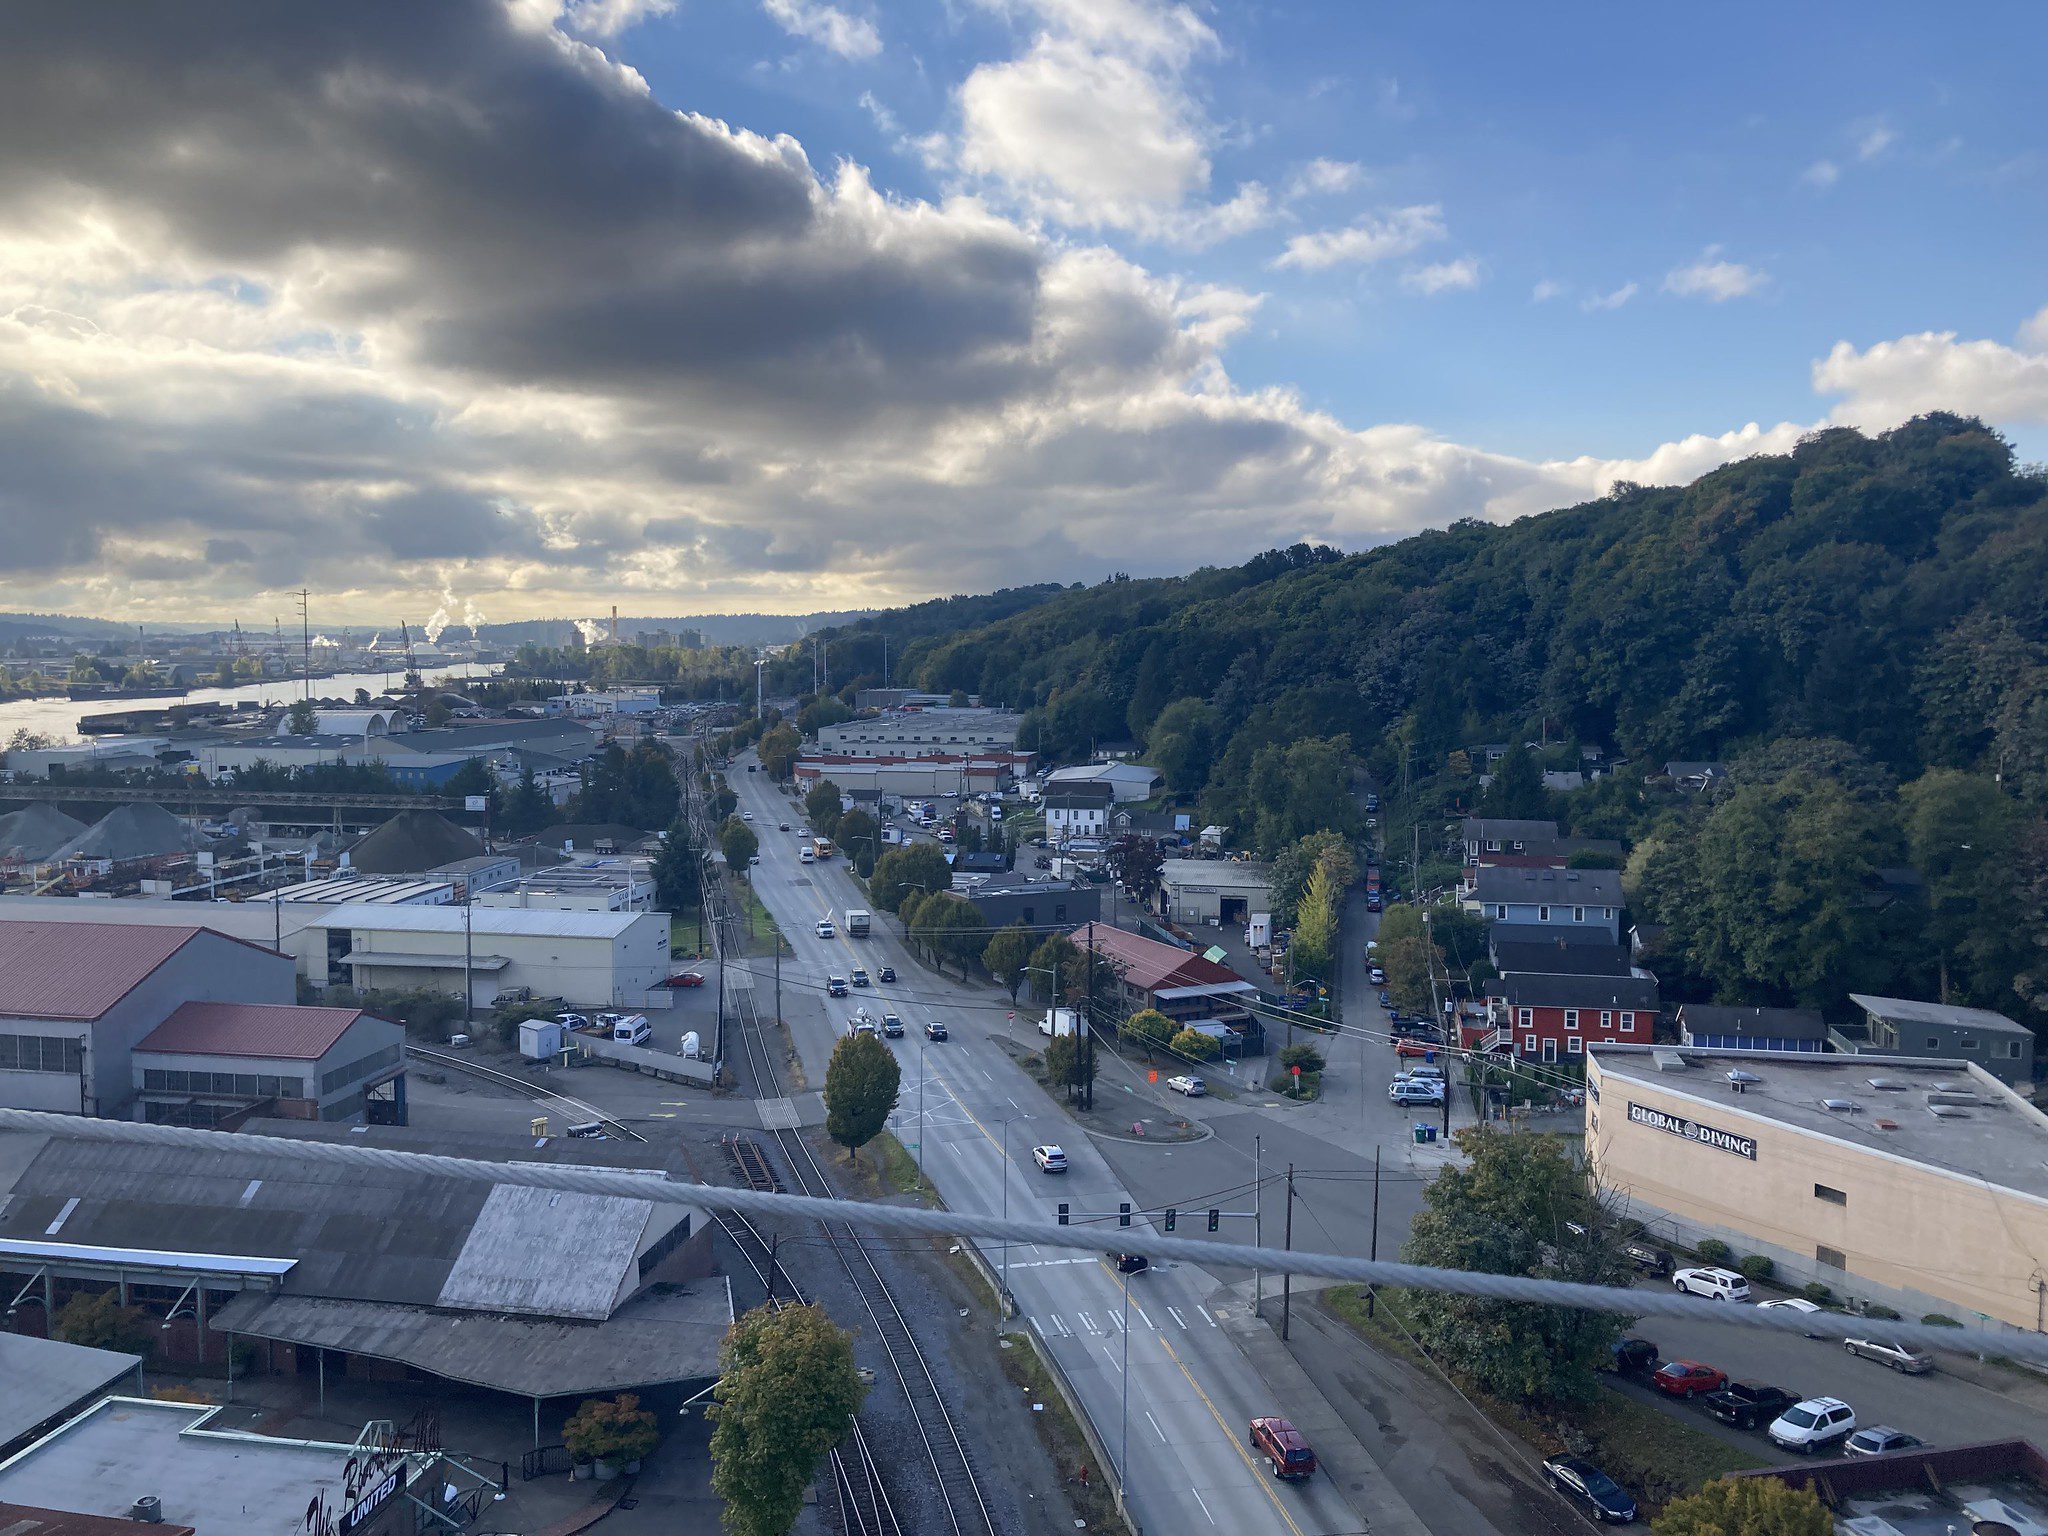 Photo from a high vantage point looking out at a street with buildings, cars, and traffic lights. Bright blue skies and clouds are above, with a hillside to the right.